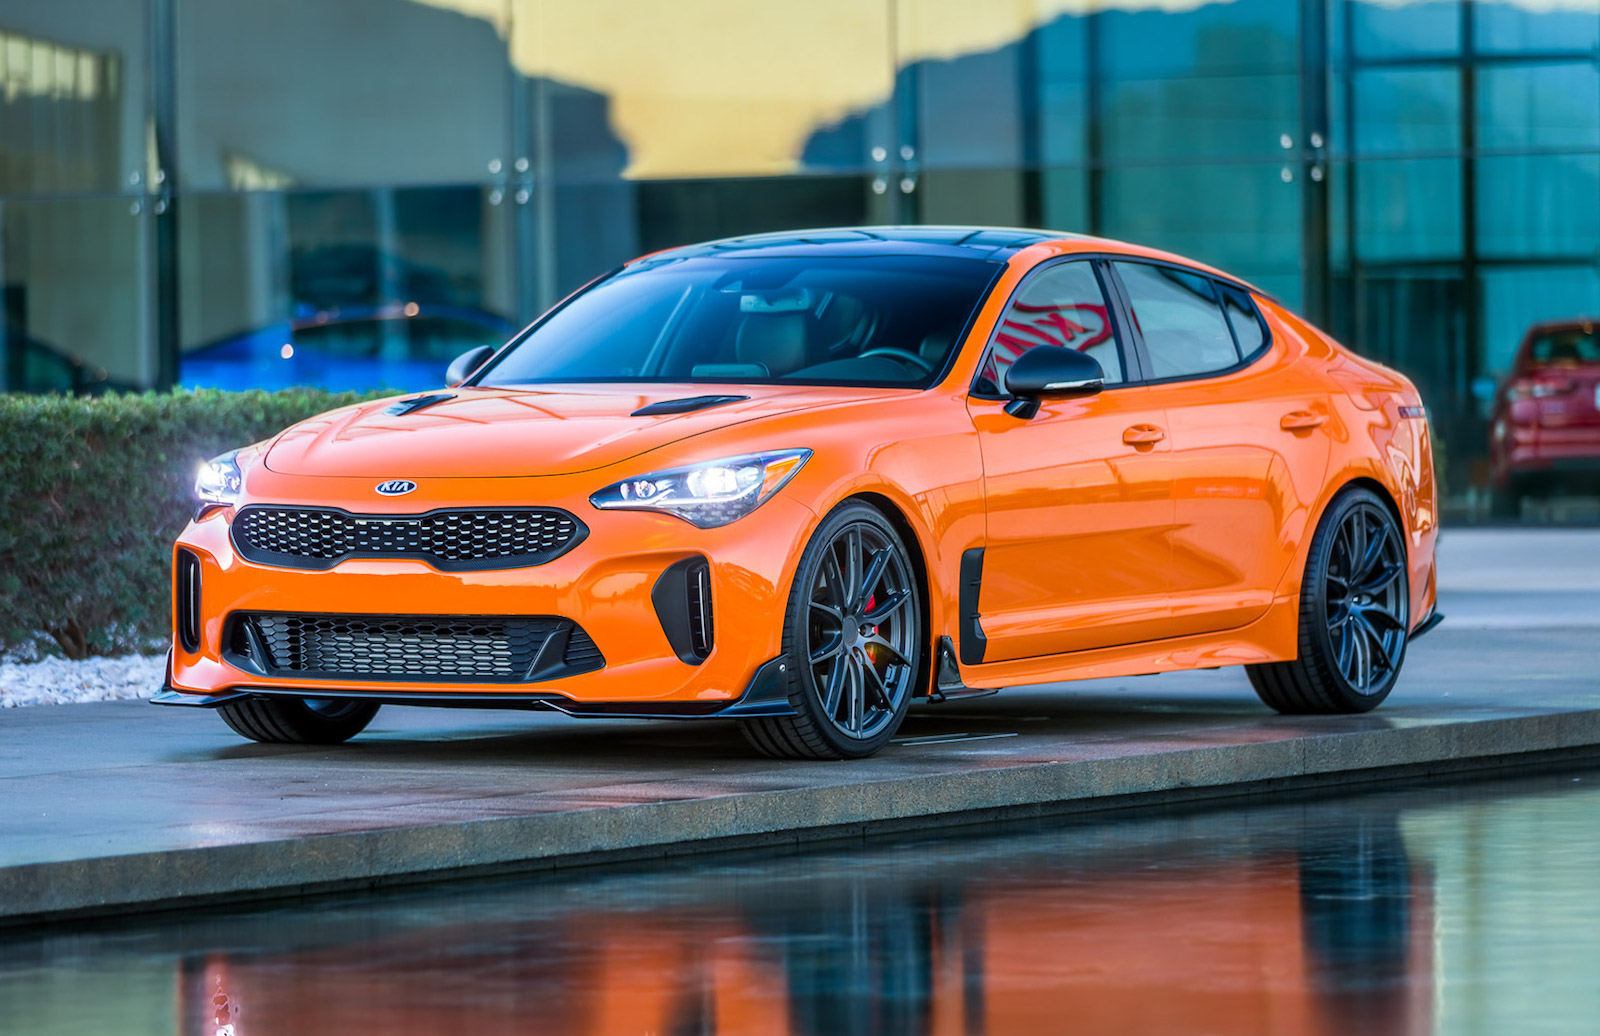 Kia Stinger GT Federation edition put together by American arm PerformanceDrive